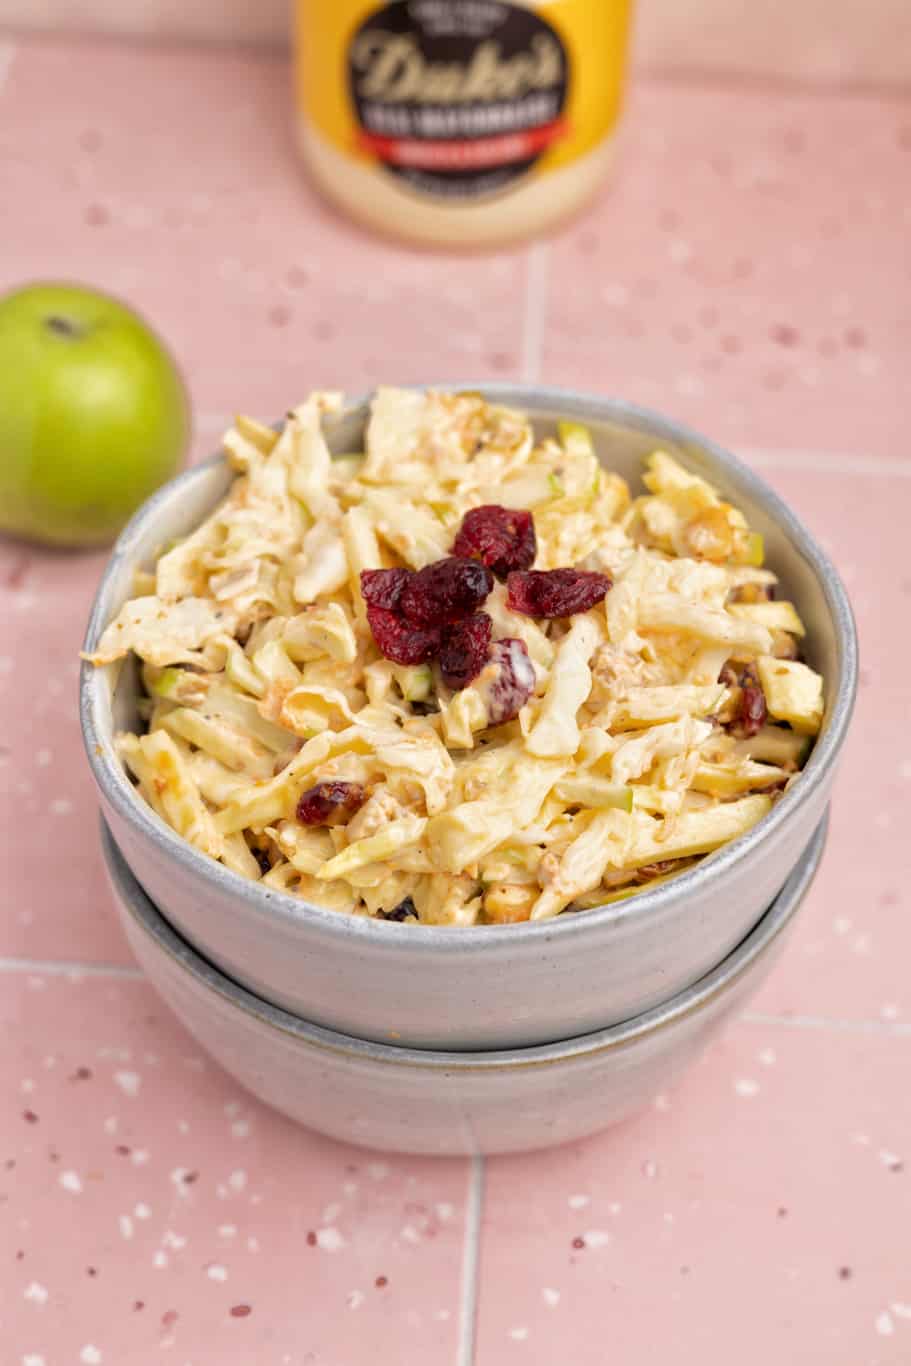 Coleslaw with Apples and Nuts is an easy salad made up of shredded cabbage, crisp apples, grated carrots, and crunchy nuts drizzled with a tangy dressing